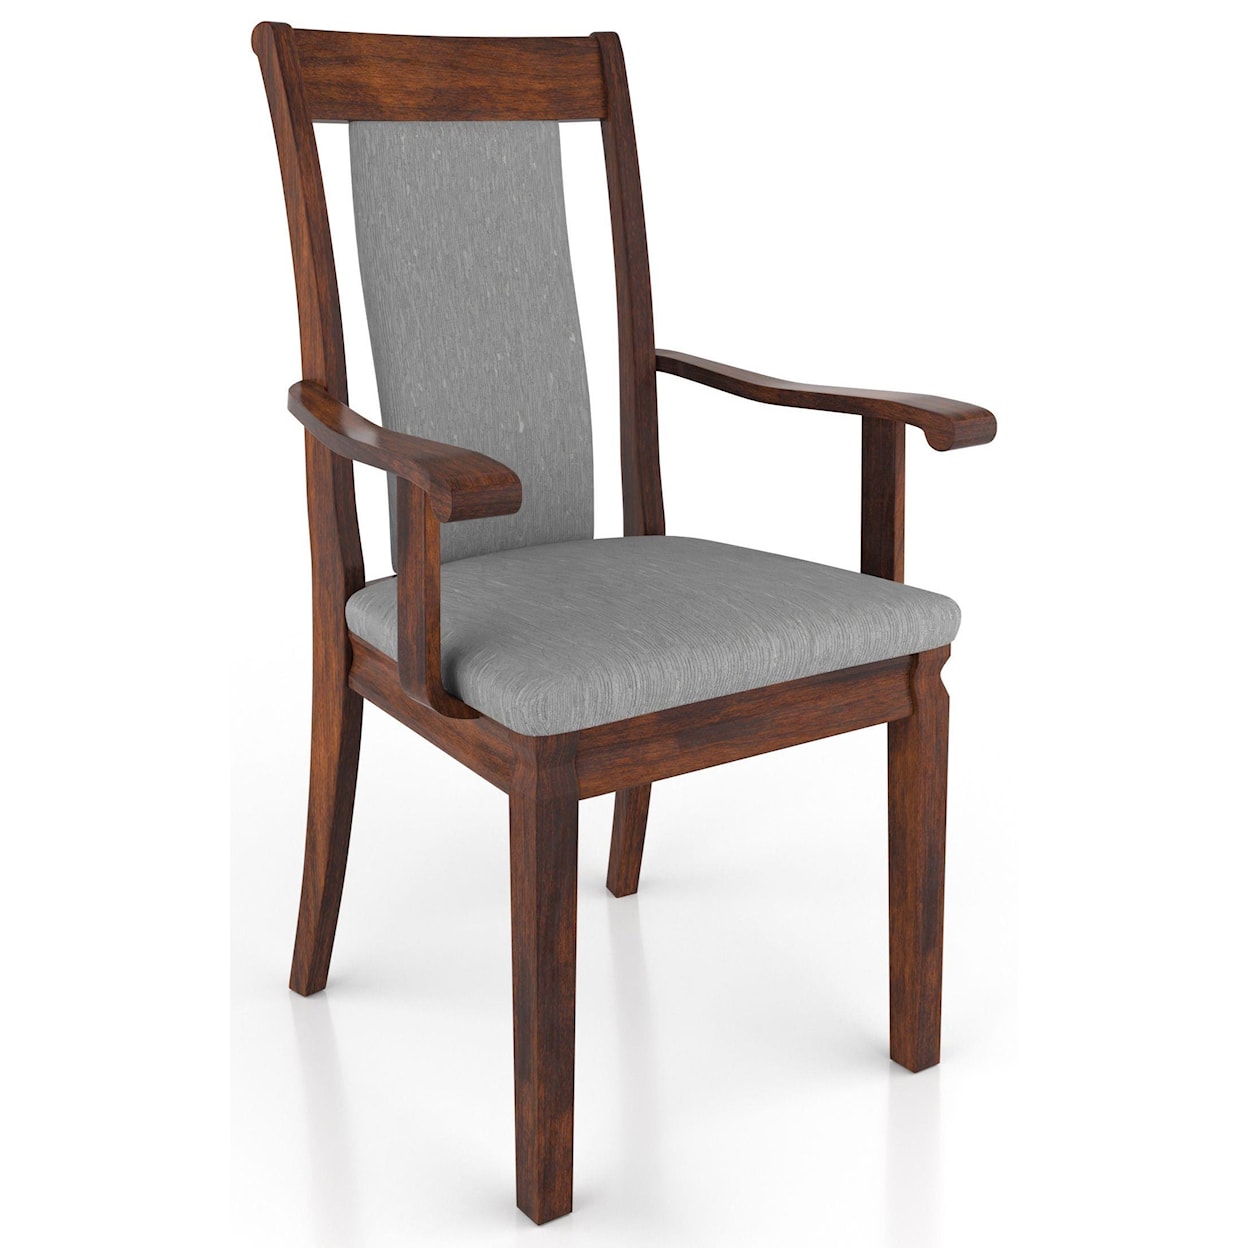 Country Comfort Woodworking Bellville Arm Chair